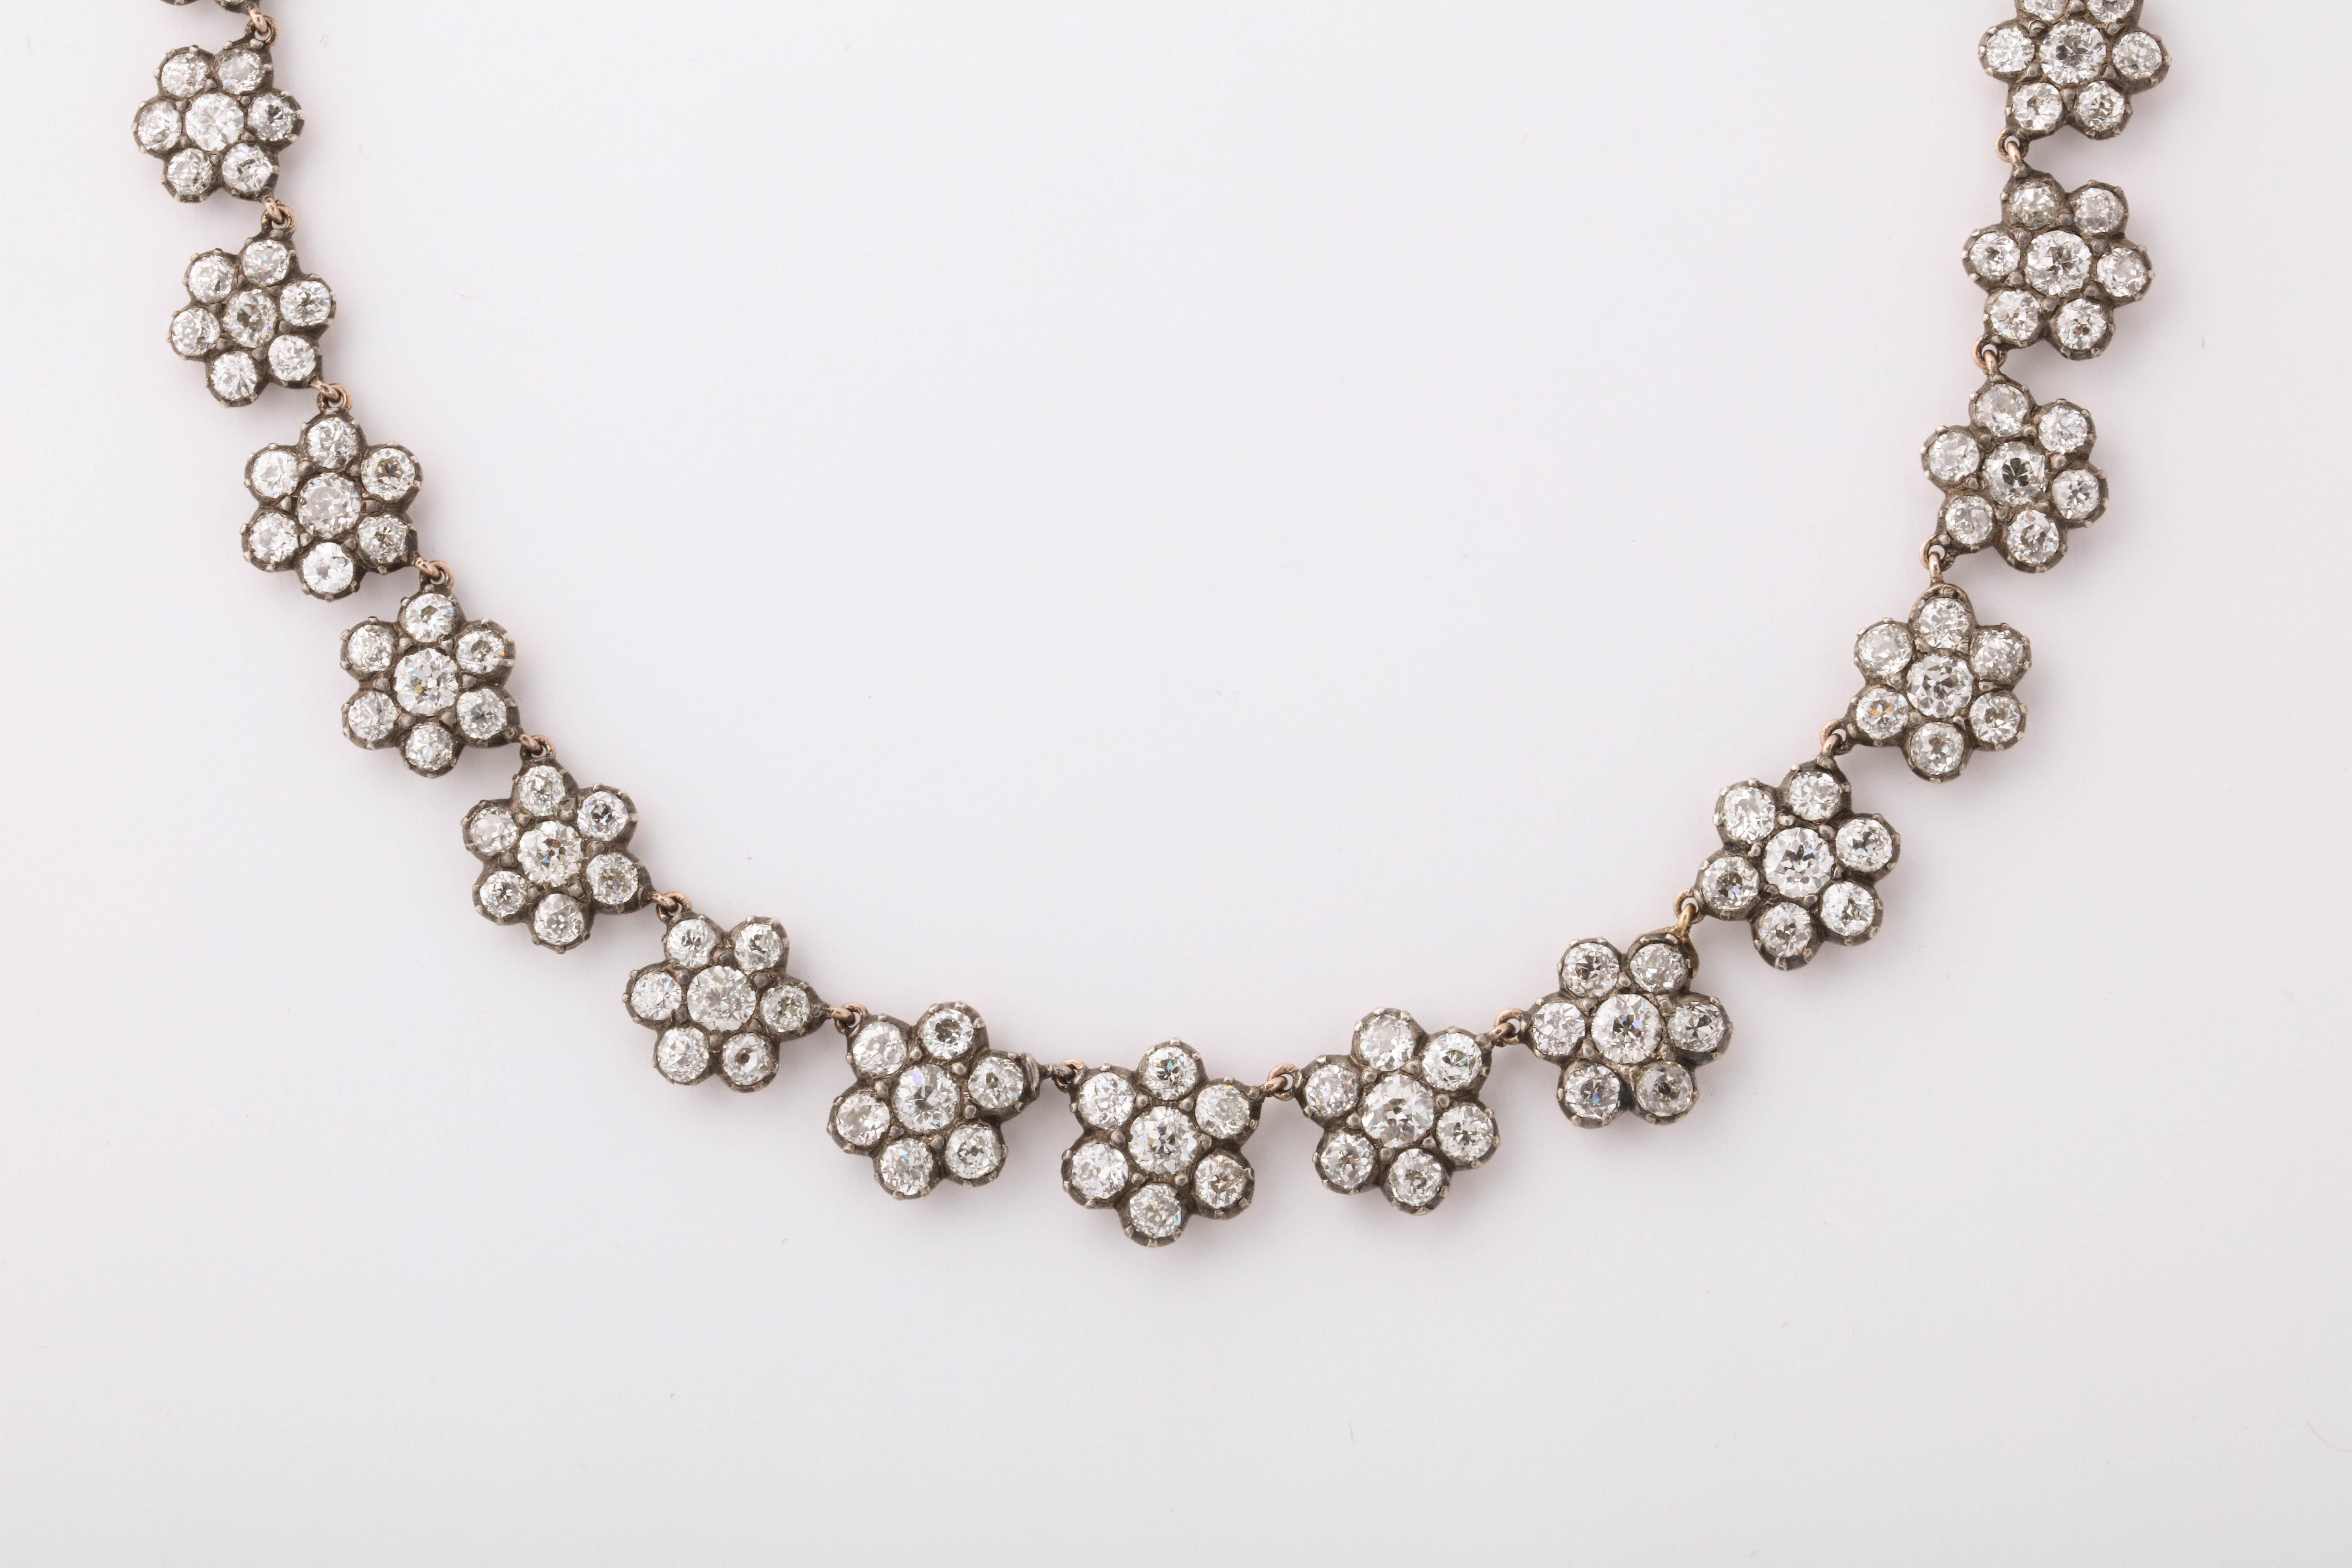 Made in London c.1900 by the famous firm Parkes of Vigo Street. The firm was known for making exquisite Georgian revival jewelry. This necklace is in the Georgian style with the diamonds set in closed back settings in silver over 15K yellow gold.